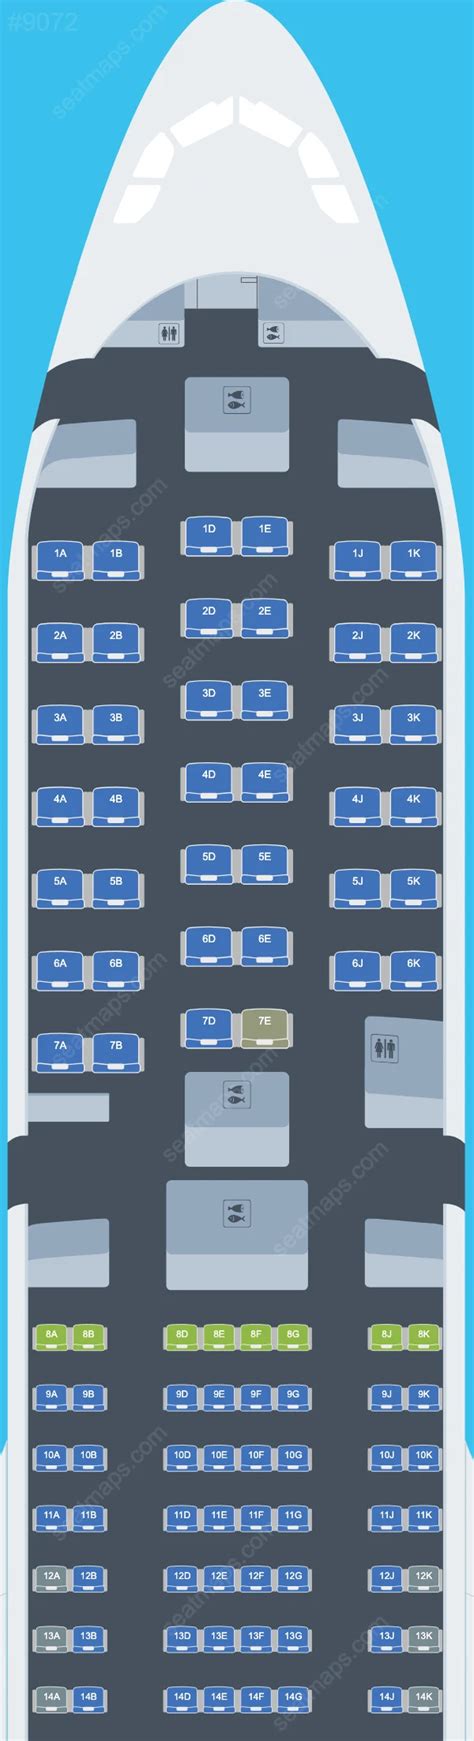 Turkish Airlines Airbus A Seat Map Updated Find The Best Seat SeatMaps